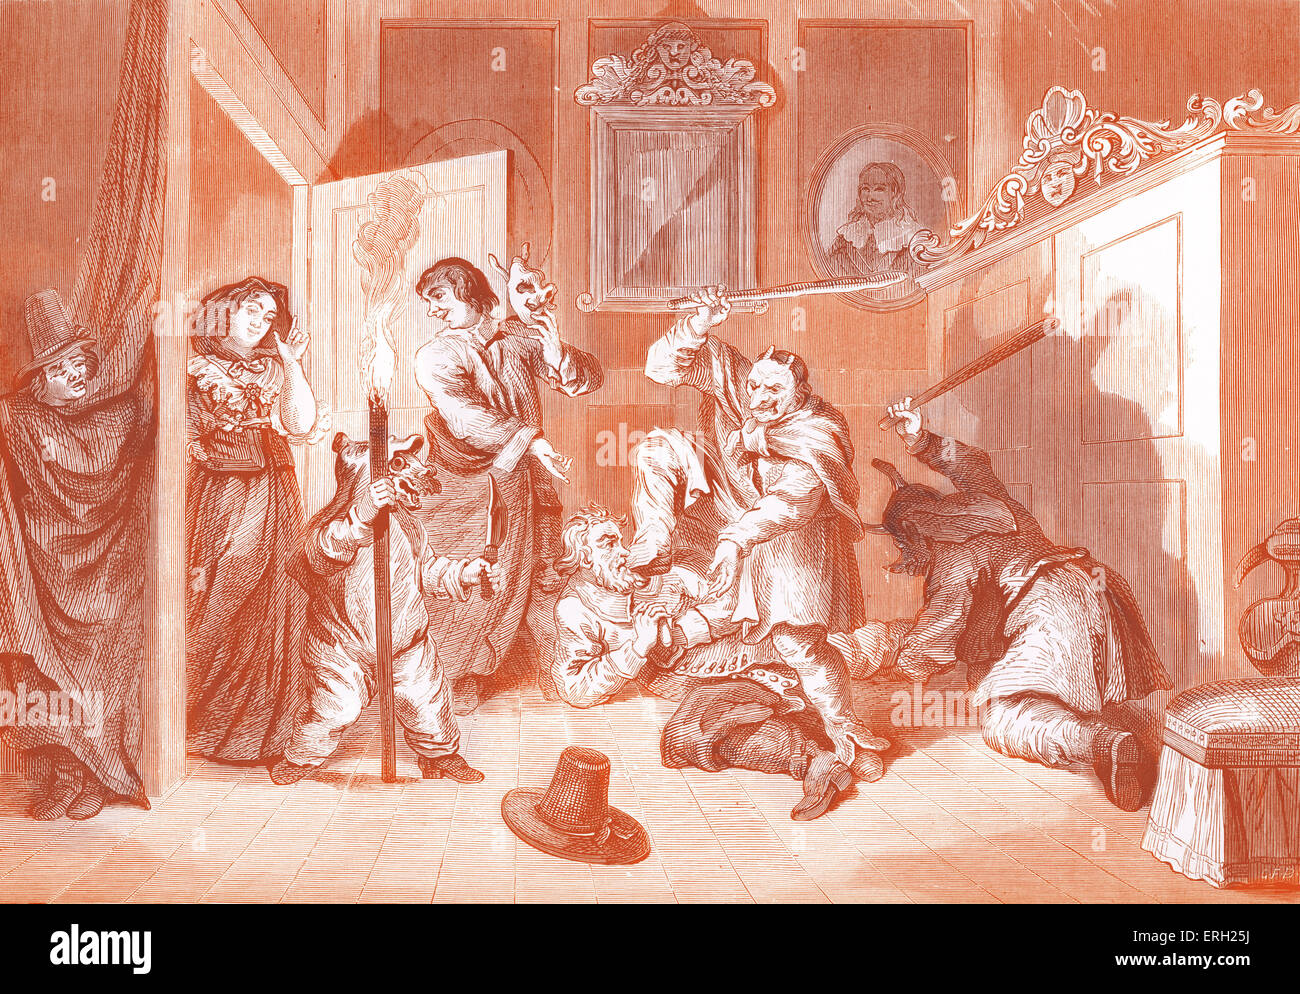 Hudibras catechised', engraving by William Hogarth. Sir Hudibras, knight-errant, is beaten and catechised by a masked gang at the instruction of the widow and the astrologer. 'Hudibras', a satircal narrative poem by Samuel Butler. SB: English poet and satirist, b 1612/13 – 1680. WH: English artist, painter and engraver, b November 10, 1697 - October 26, 1764. Stock Photo